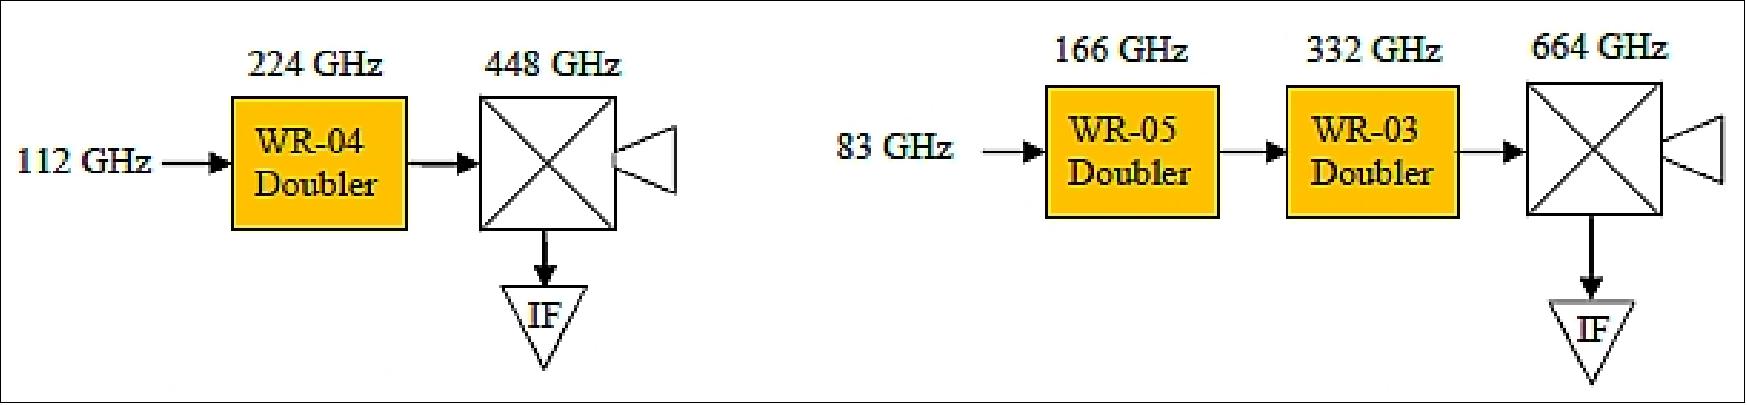 Figure 13: Left hand side: schematic of a 448 GHz receiver front-end including a 224 GHz medium power doubler and a 448 GHz sub-harmonic mixer with IF LNA. Right hand side: schematic of a 664 GHz receiver front-end including a 166 GHz high power doubler, a 332 GHz medium power doubler, and a 664 GHz sub-harmonic mixer with IF LNA (image credit: ESA)